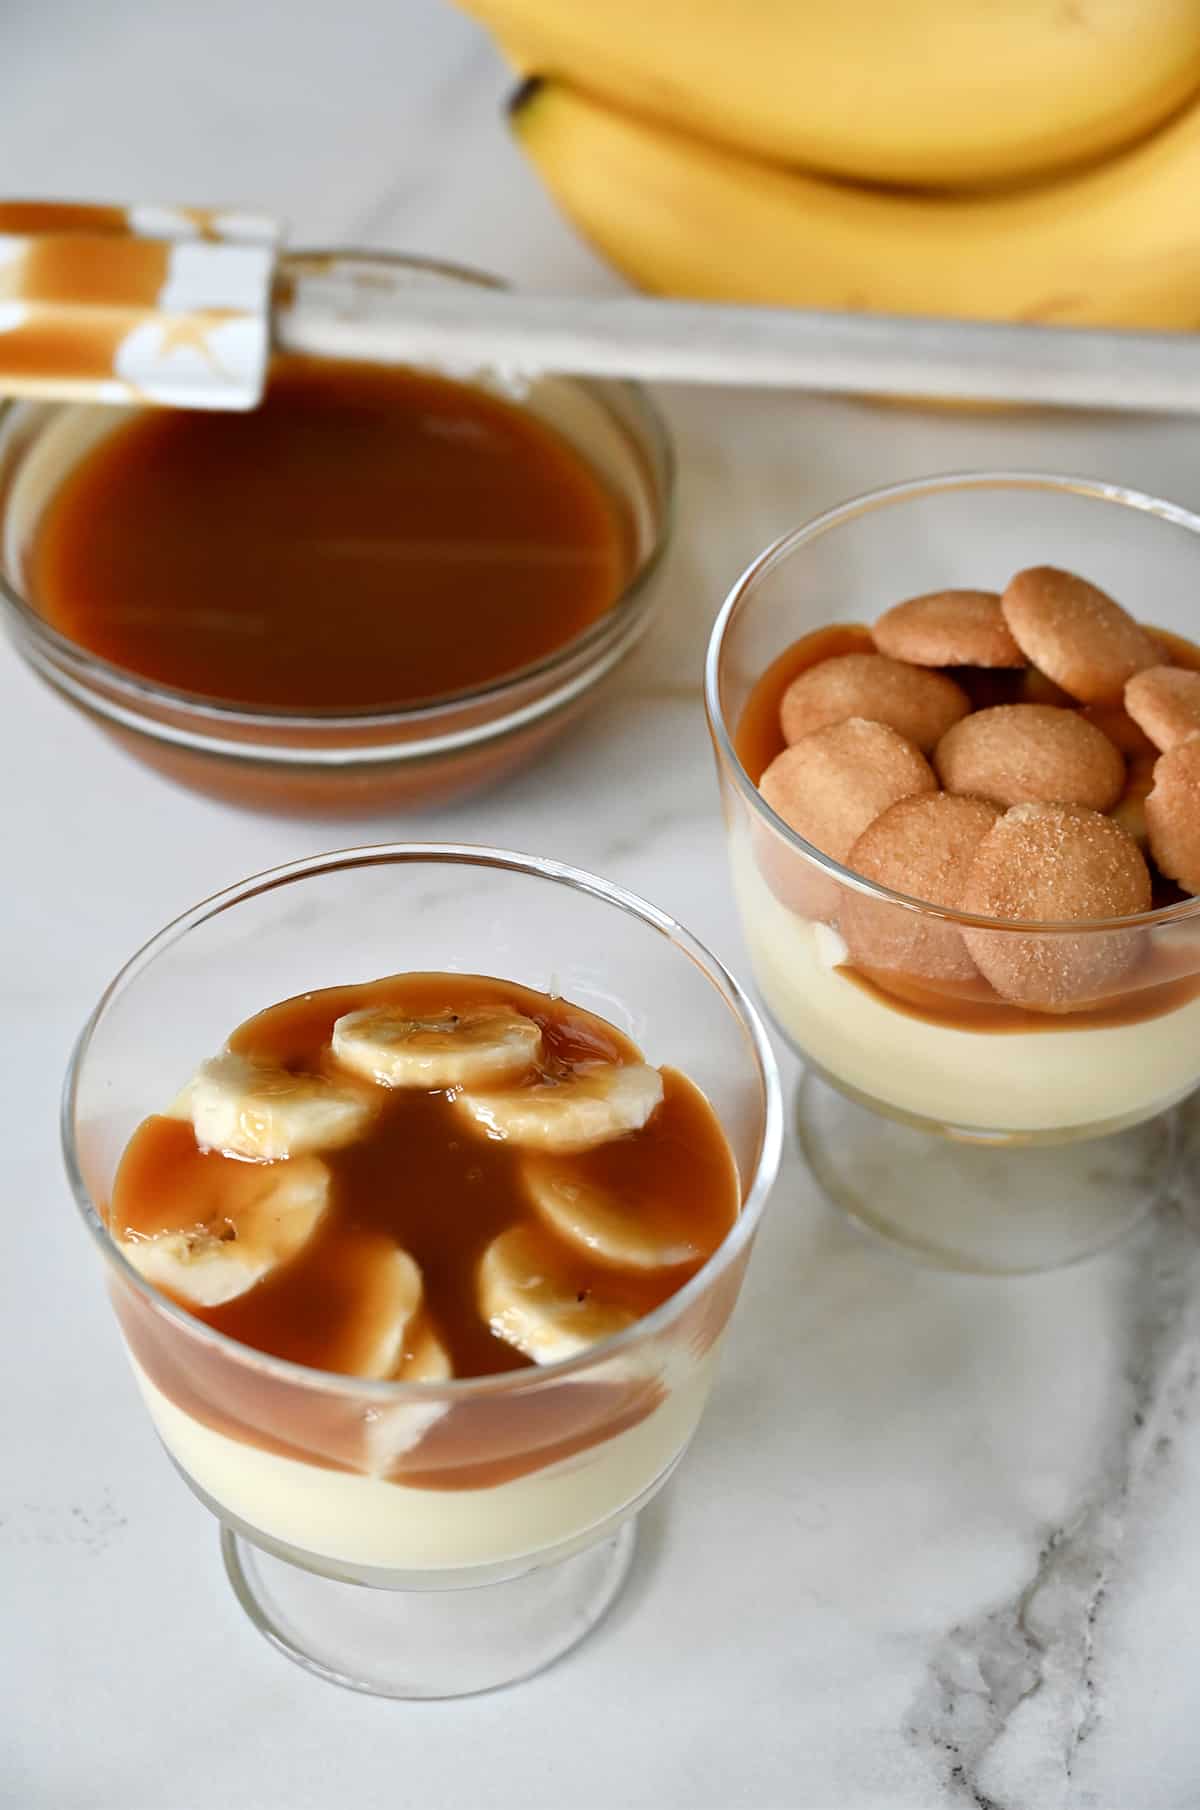 Two parfait glasses containing banana pudding topped with salted caramel sauce, sliced banana and mini vanilla wafers. A glass bowl containing caramel sauce and a spatula is nearby.